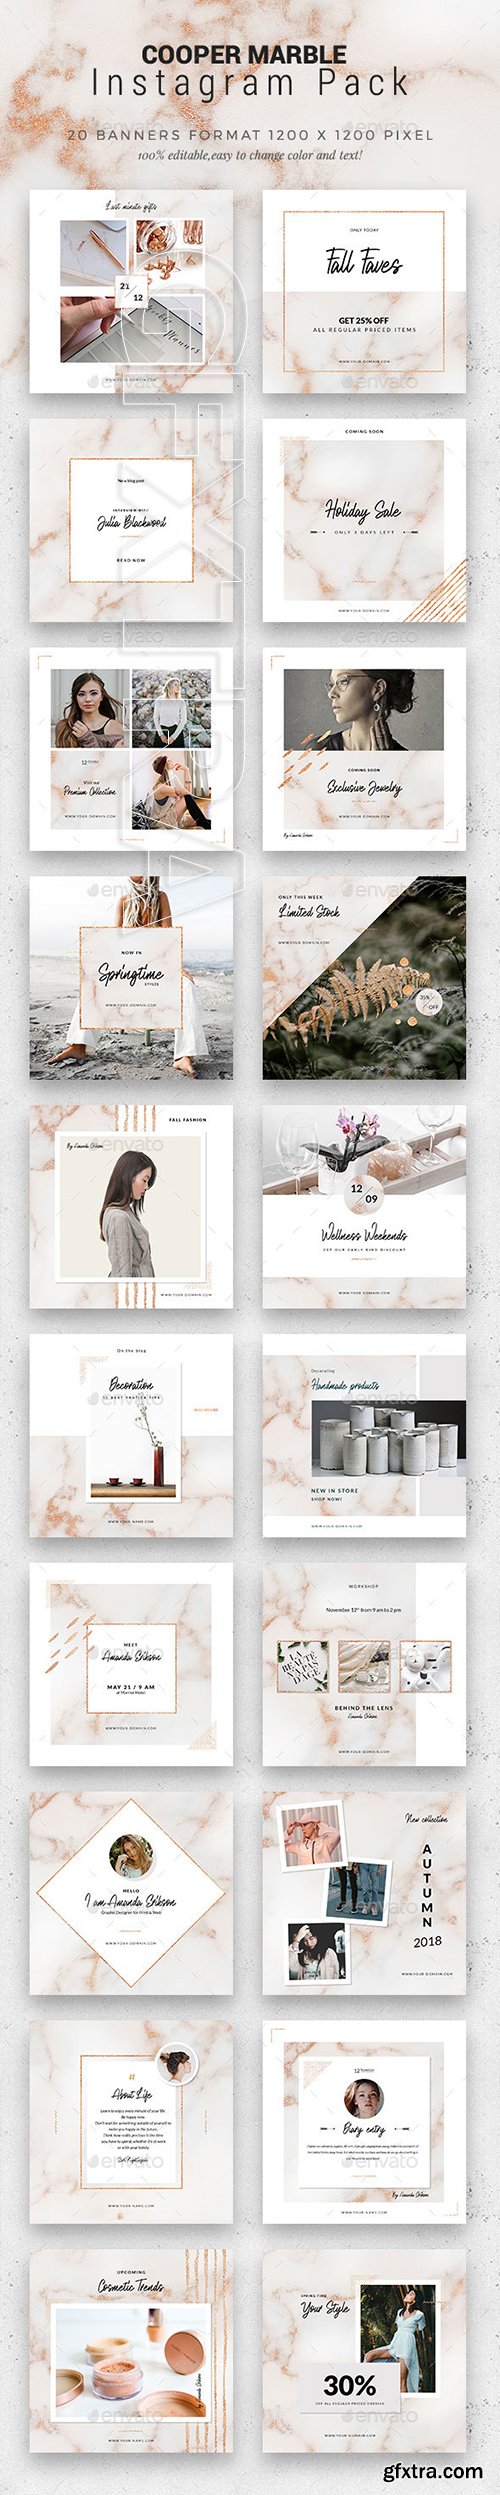 GraphicRiver - Cooper Marble - Instagram Pack 22697882